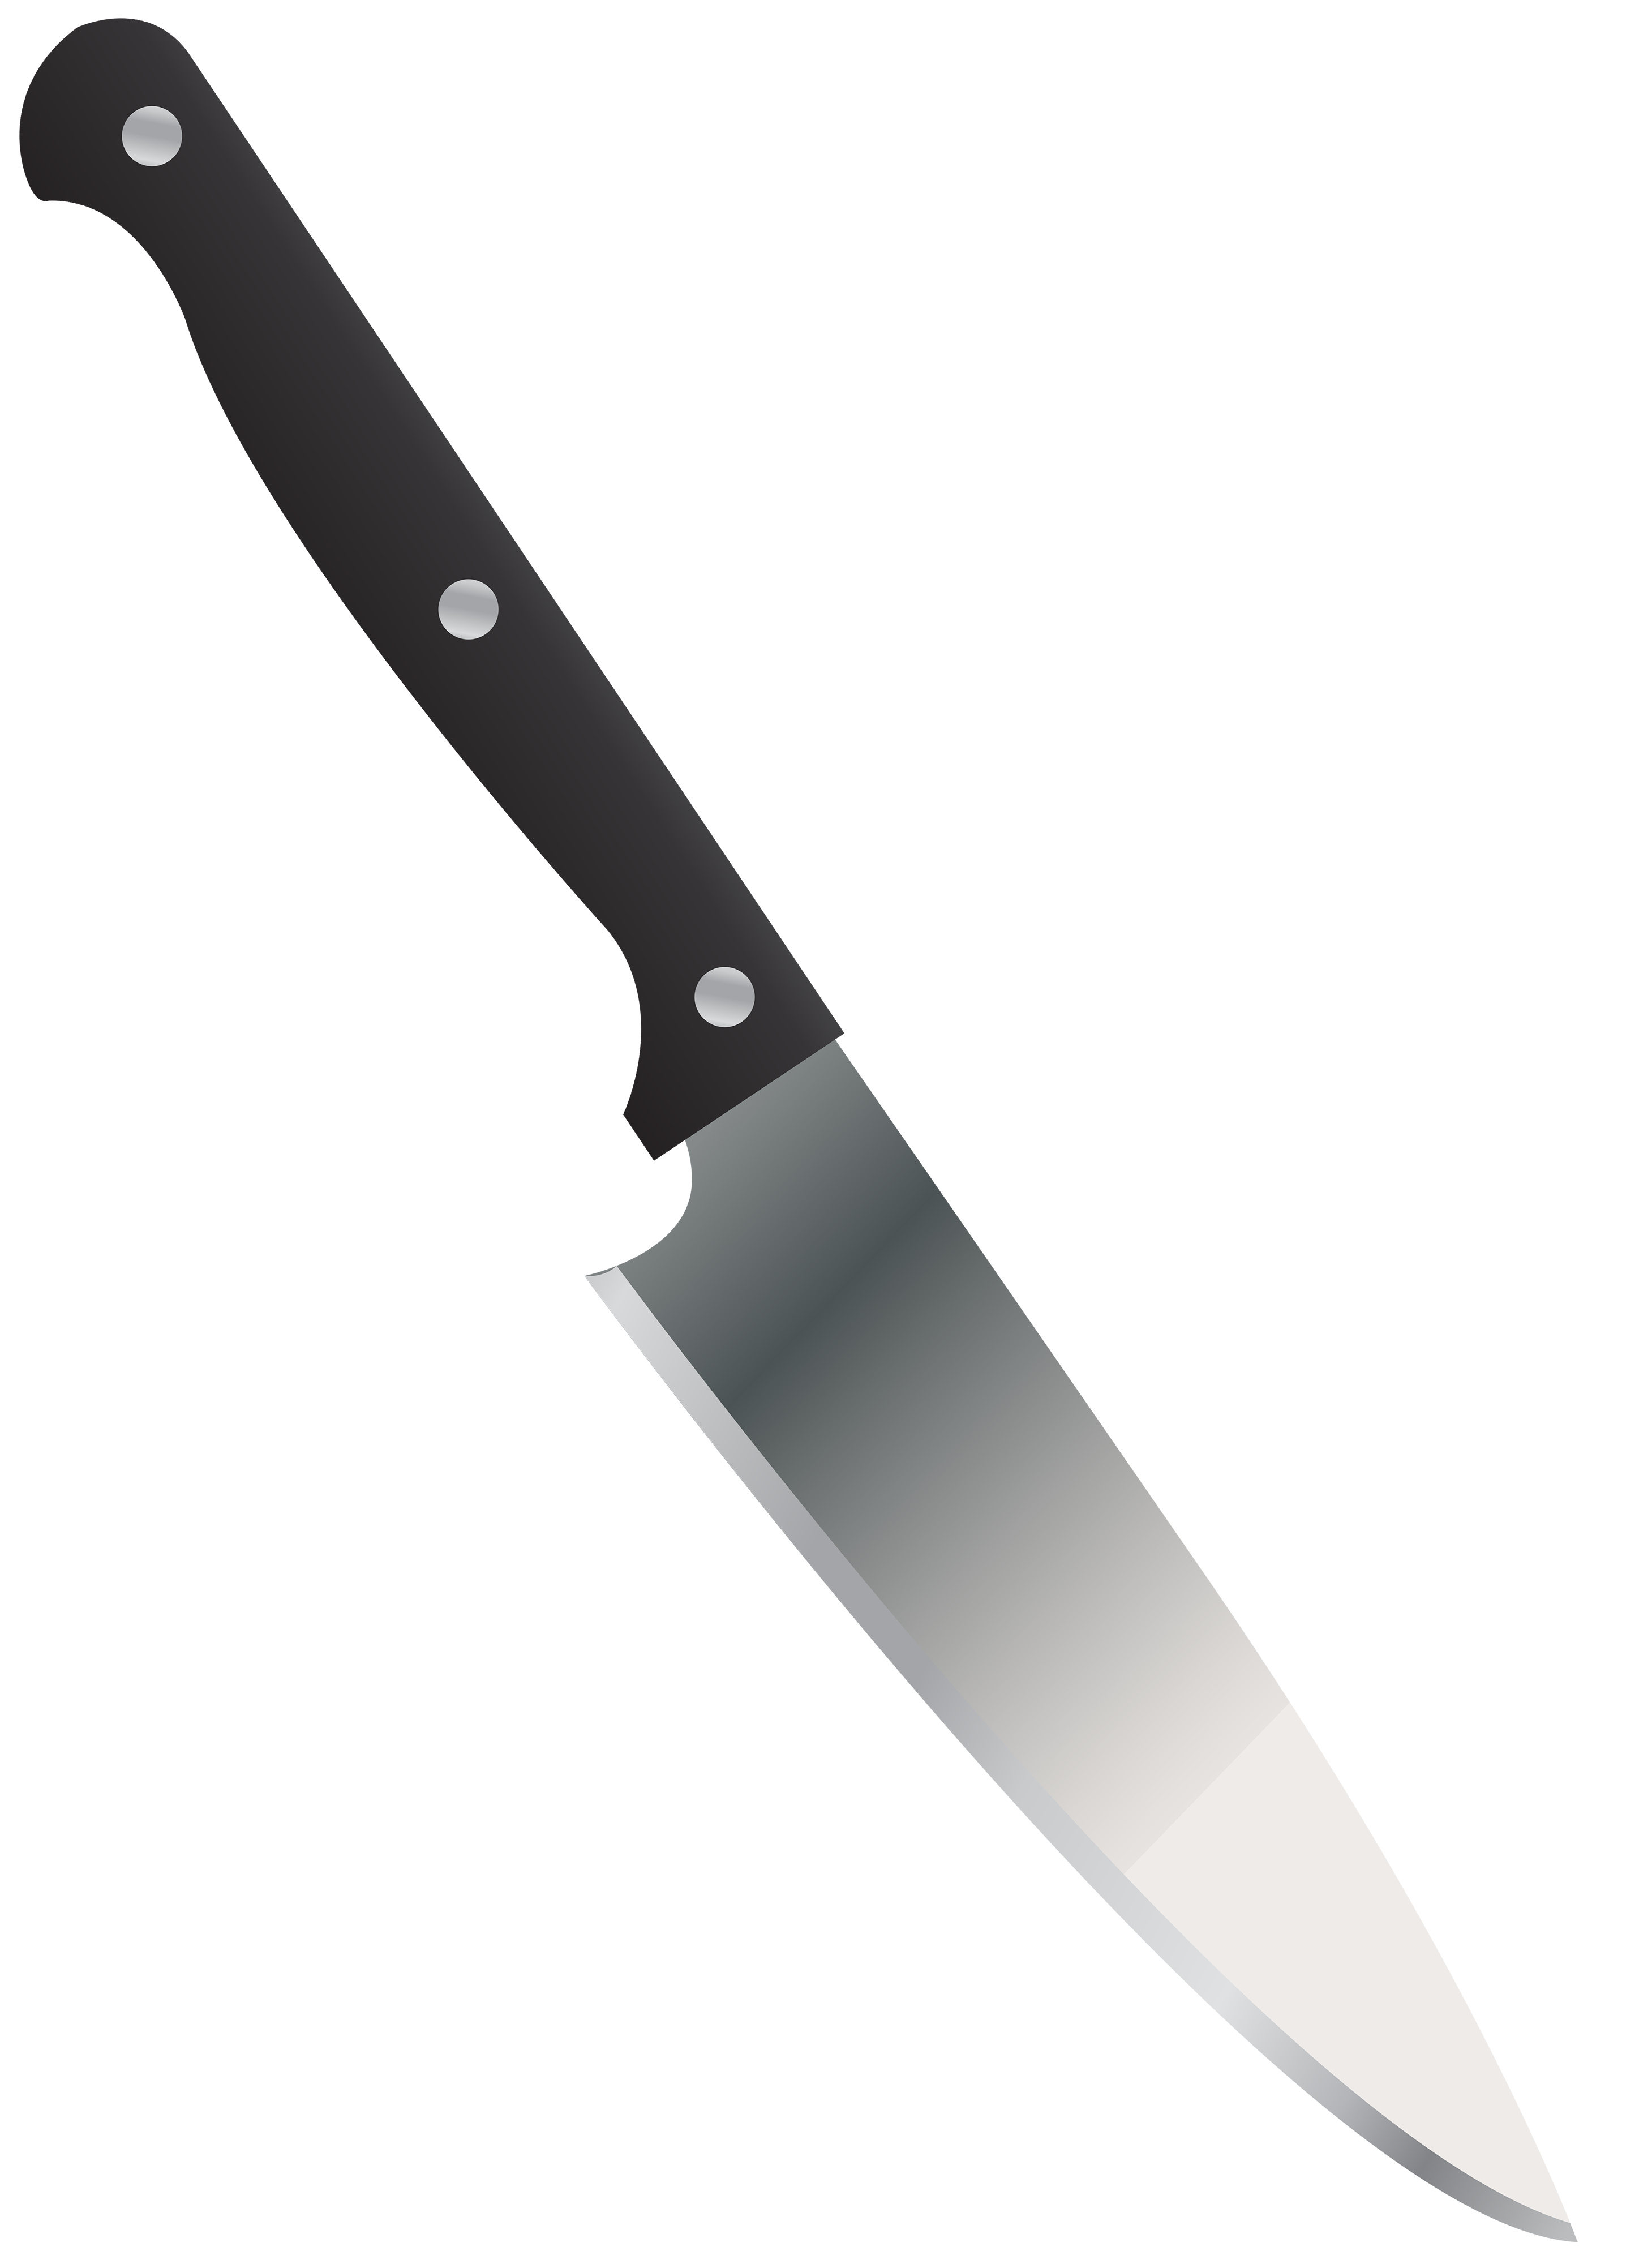 clipart pictures of knives - photo #32